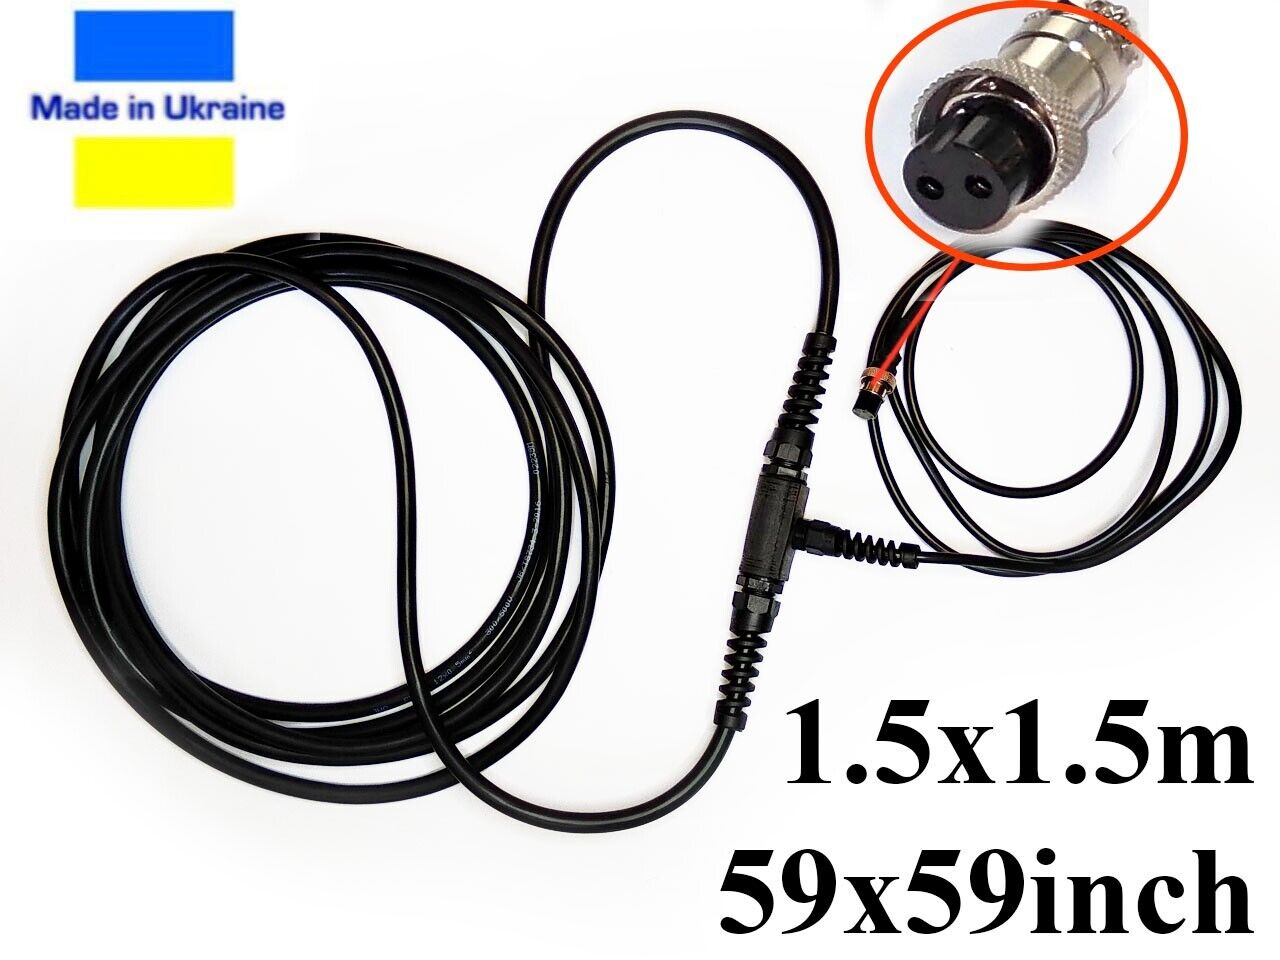 1,5mx1,5m search coil cable without pipe for PI Pulse Induction metal detector